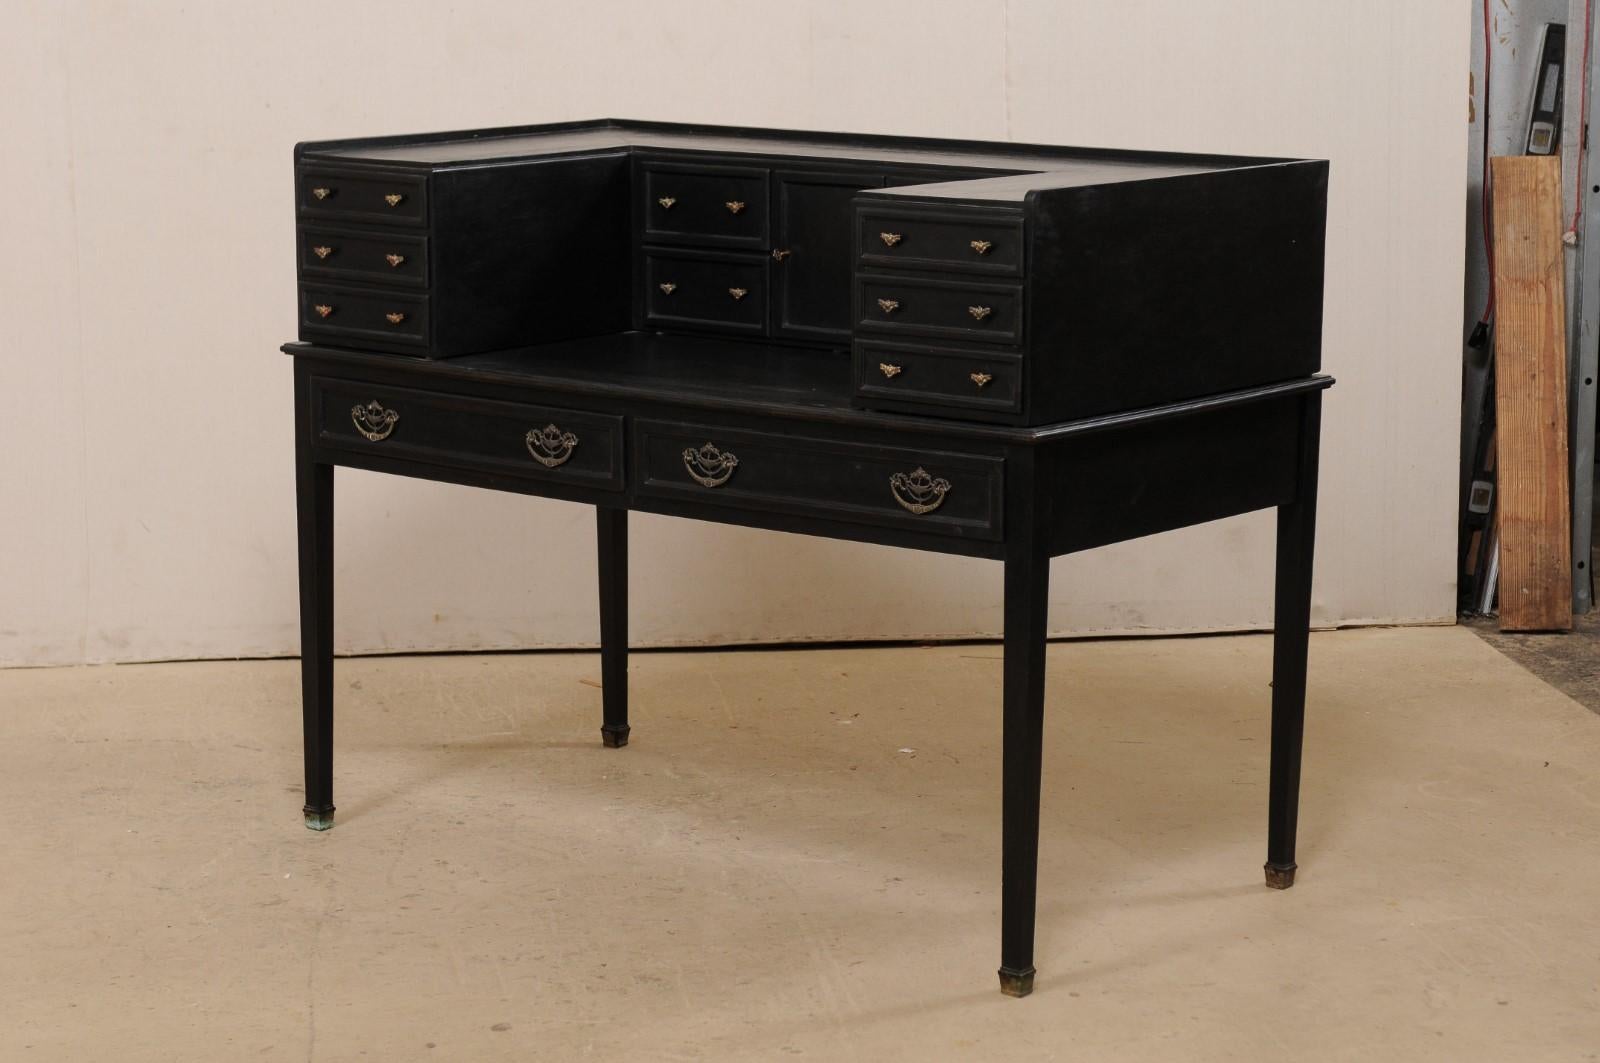 Wood English Carlton House Desk in Black Finish with Great Storage Early 20th Century